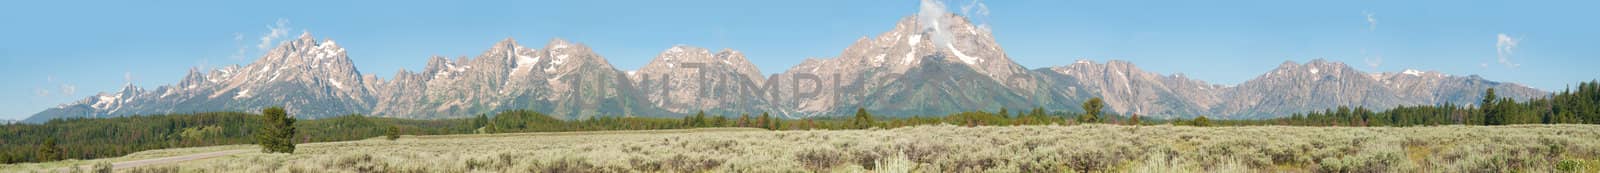 panoramic view of the Grand Tetons in Wyoming